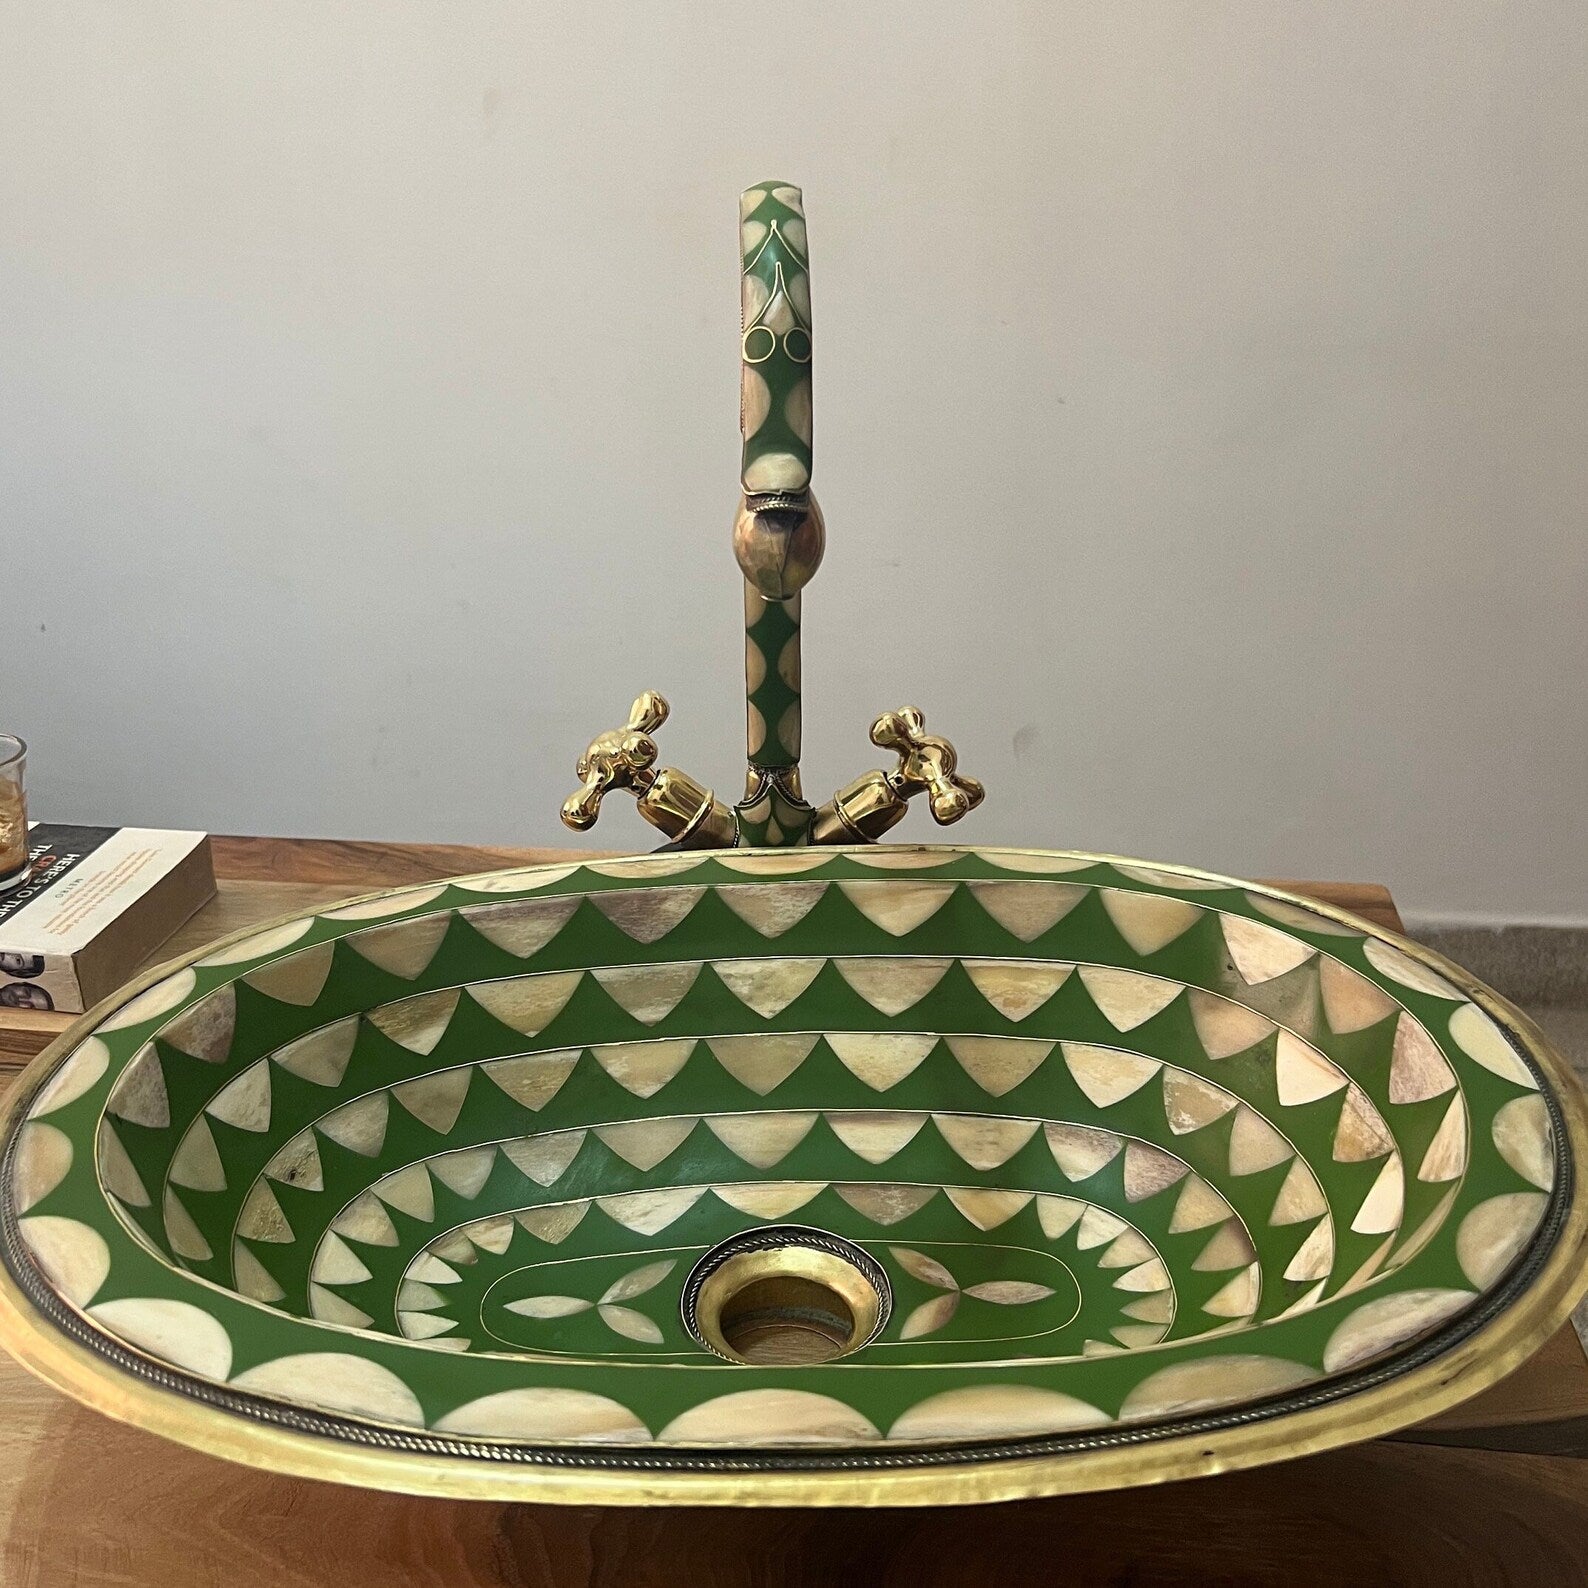 Unlacquered Brass Vessel Sink Faucet - Green Resin, Bone and Brass Conception